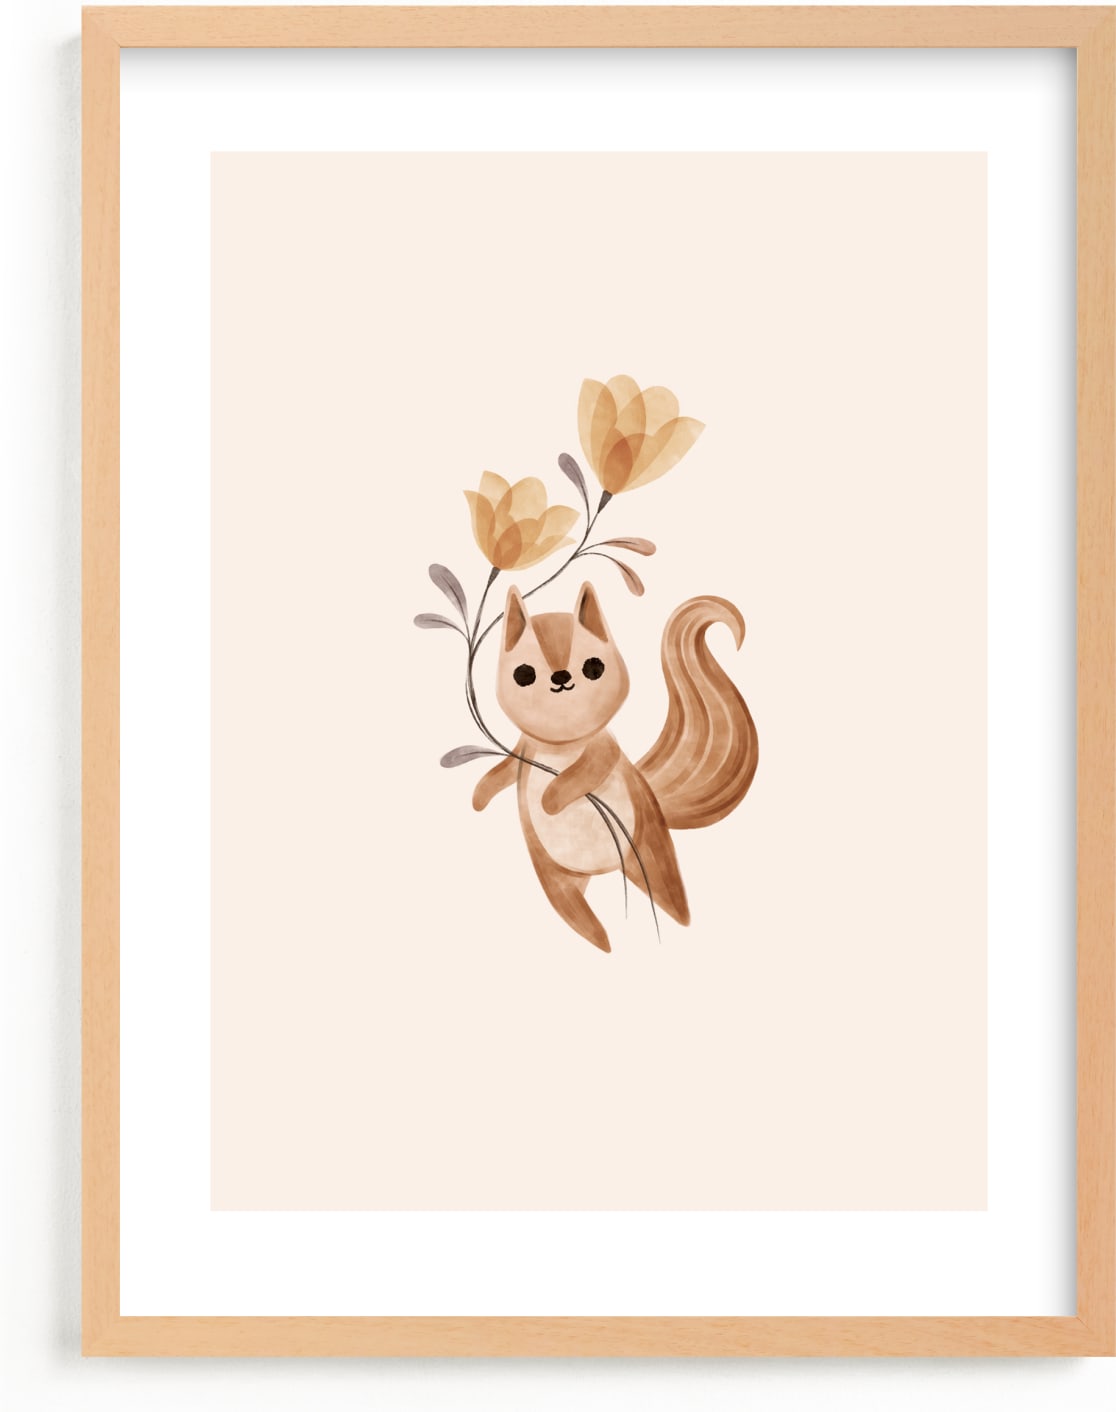 This is a brown nursery wall art by Vivian Yiwing called squirrel with flowers.